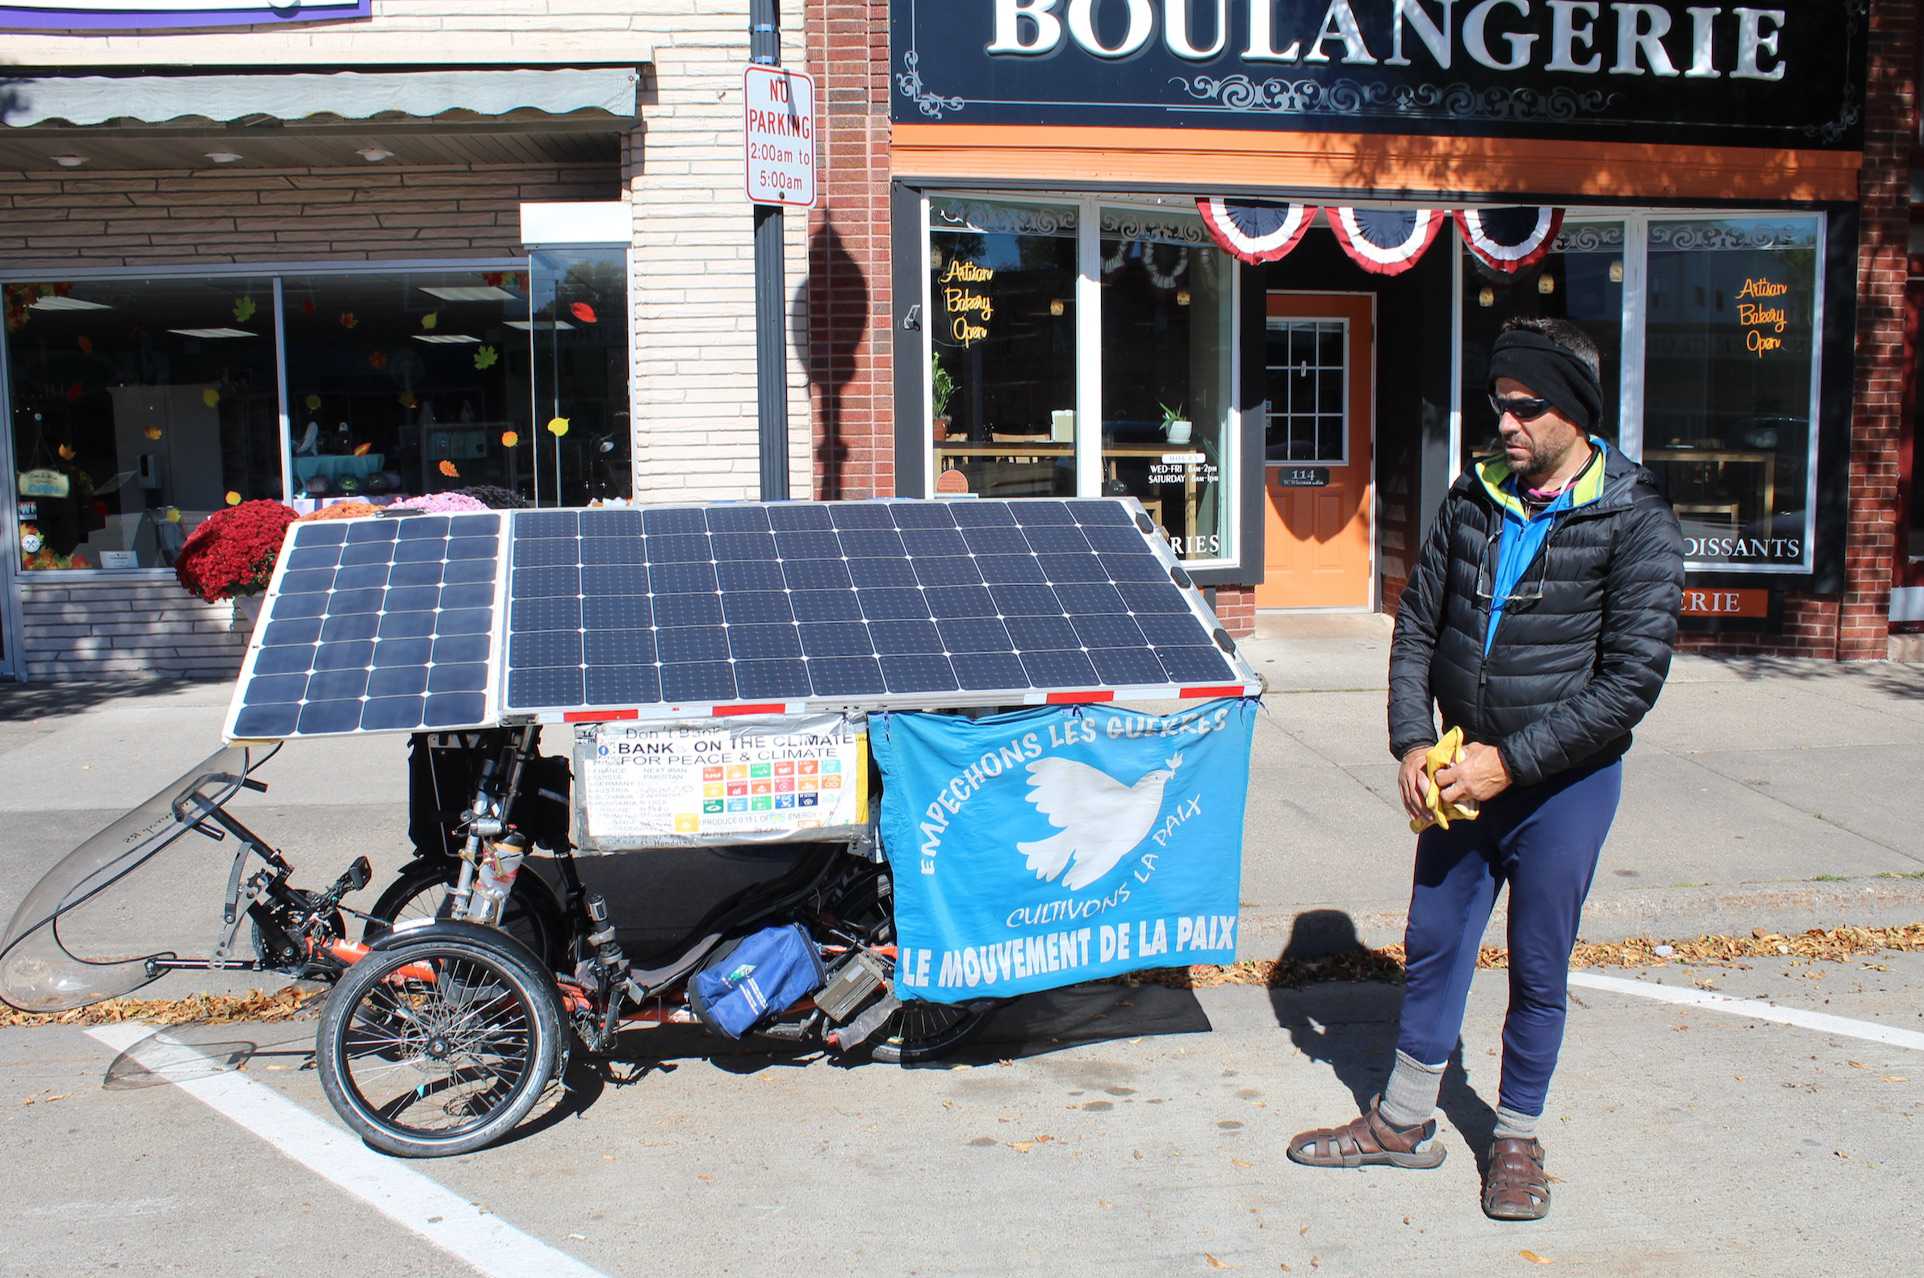 French Climate activist visits Boulangerie in Tomahawk during cross-country biking journey